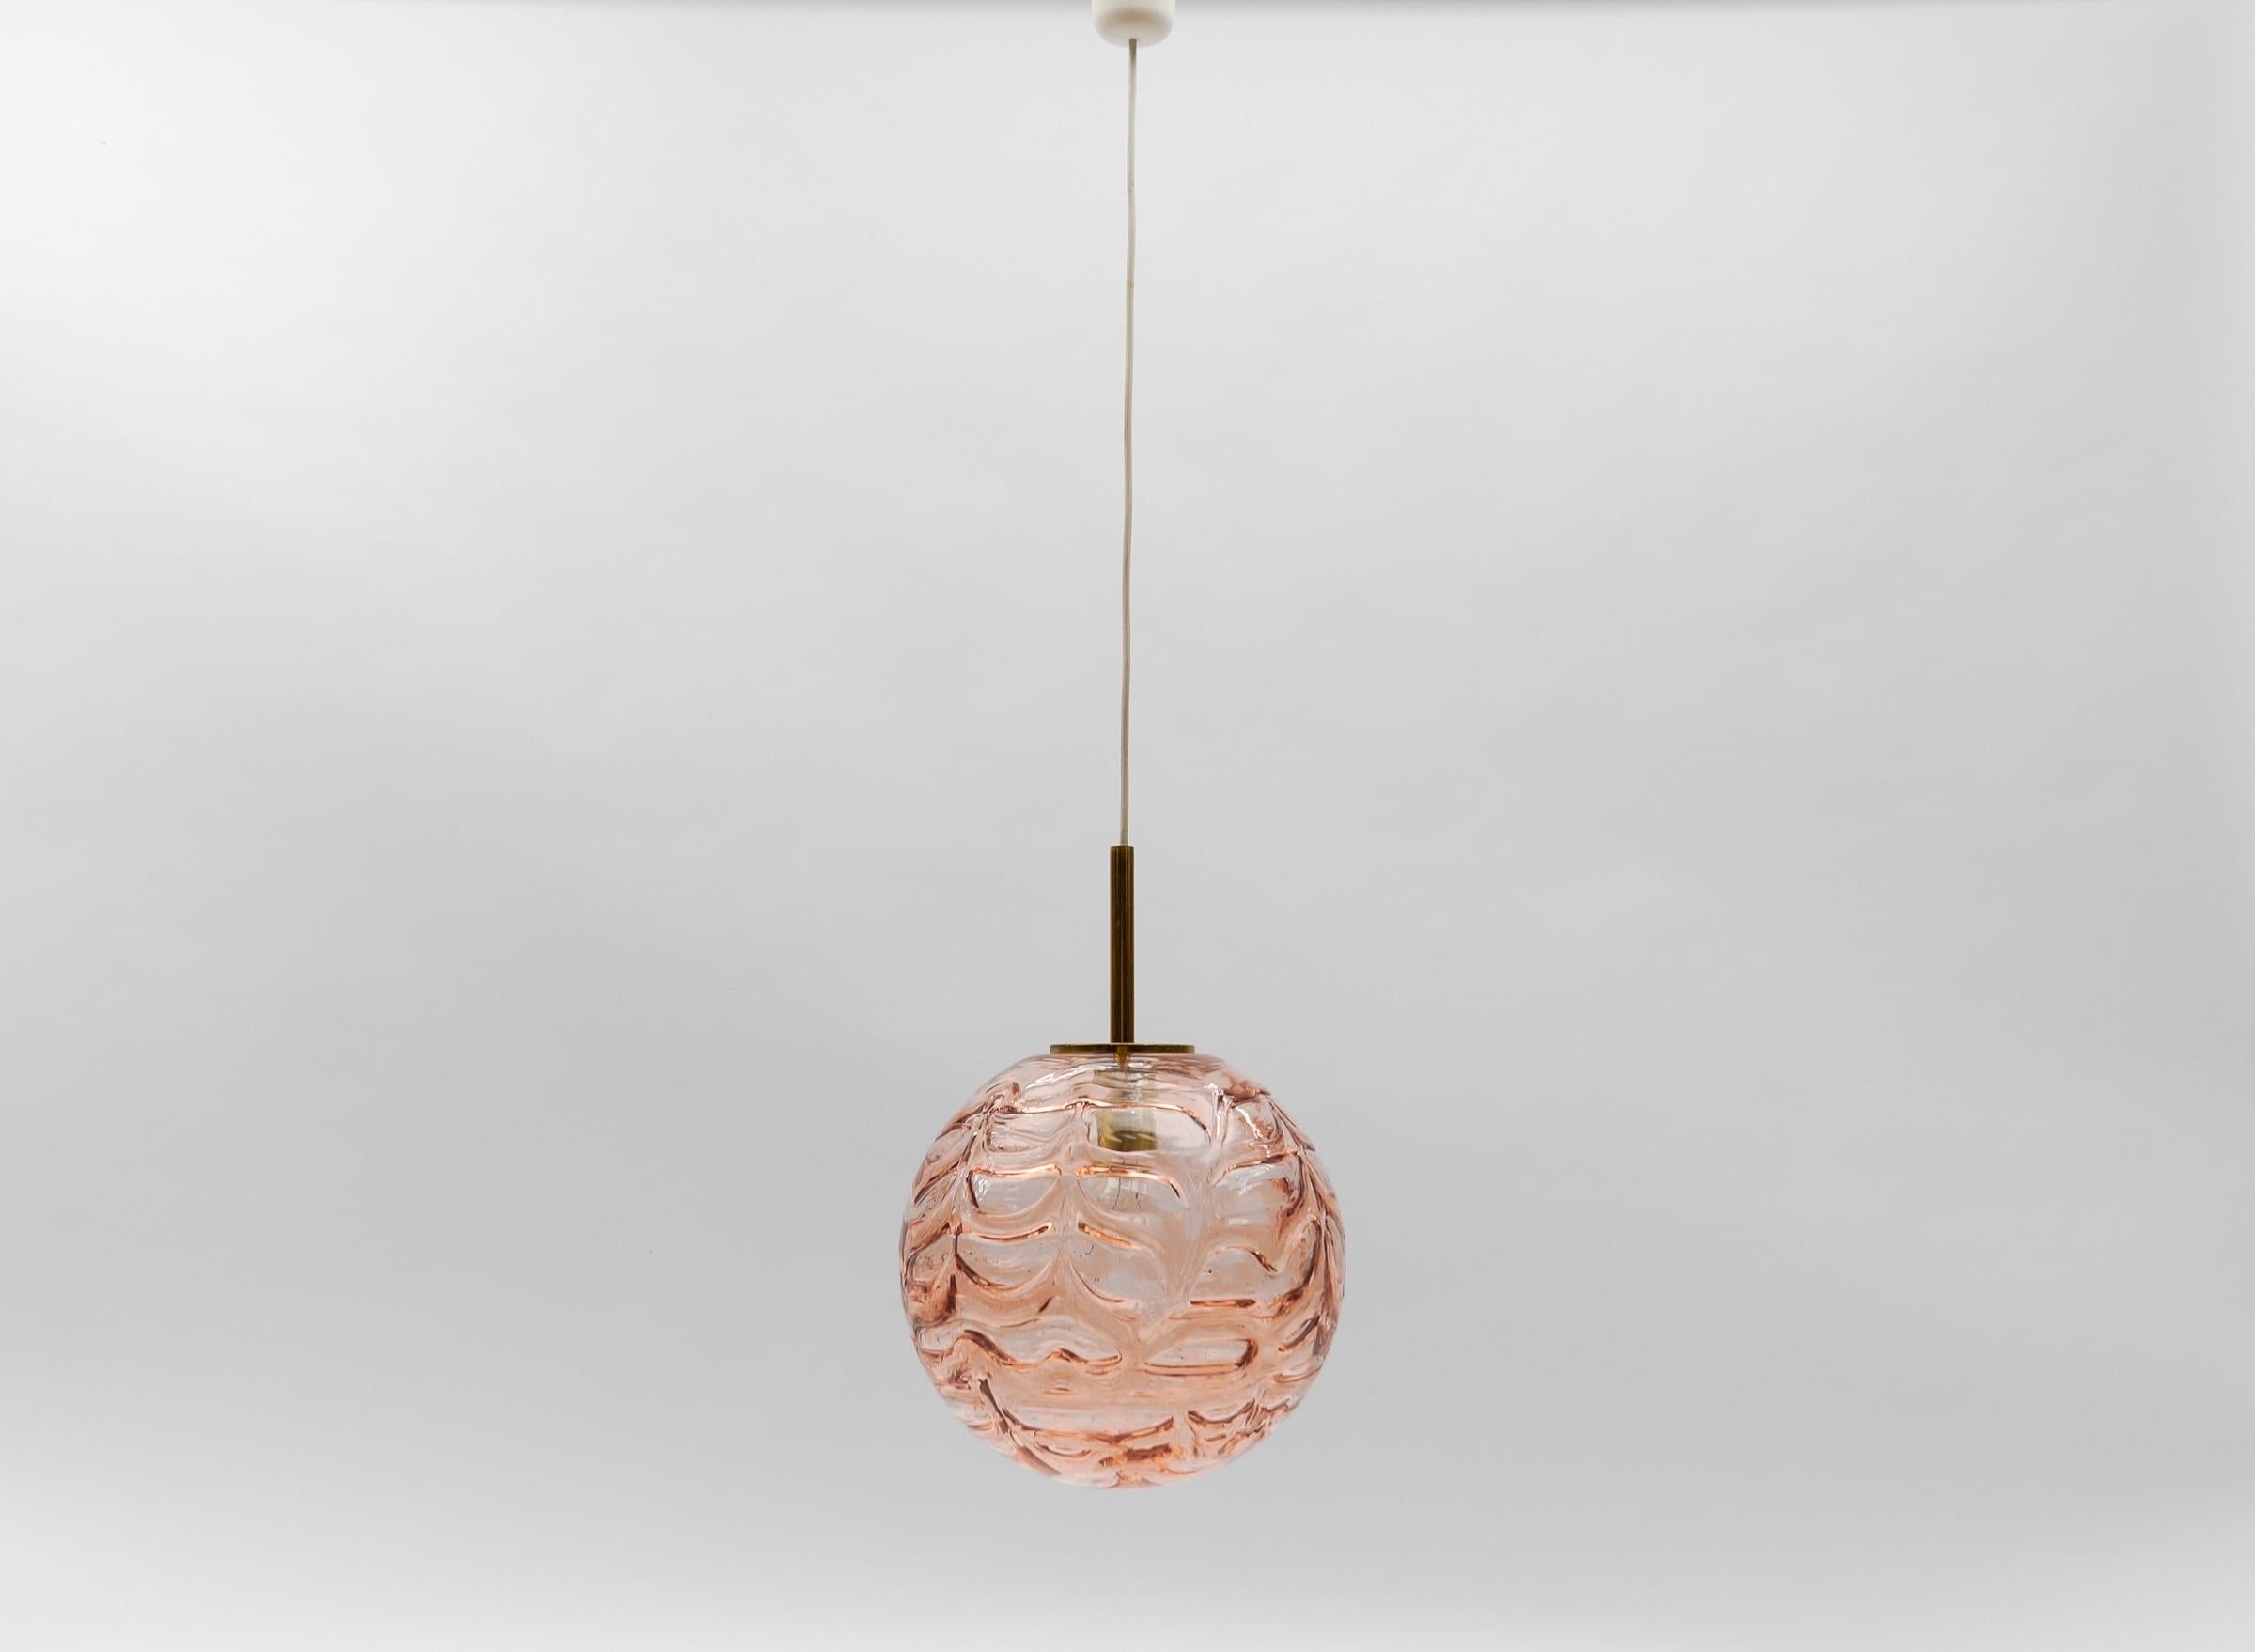 Pink Murano Glass Ball Pendant Lamp by Doria, - 1960s Germany 

Dimensions
Diameter: 11.81 in. (30 cm)
Height: 41.33 in. (105 cm)

One E27 socket. Works with 220V and 110V.

Our lamps are checked, cleaned and are suitable for use in the USA.